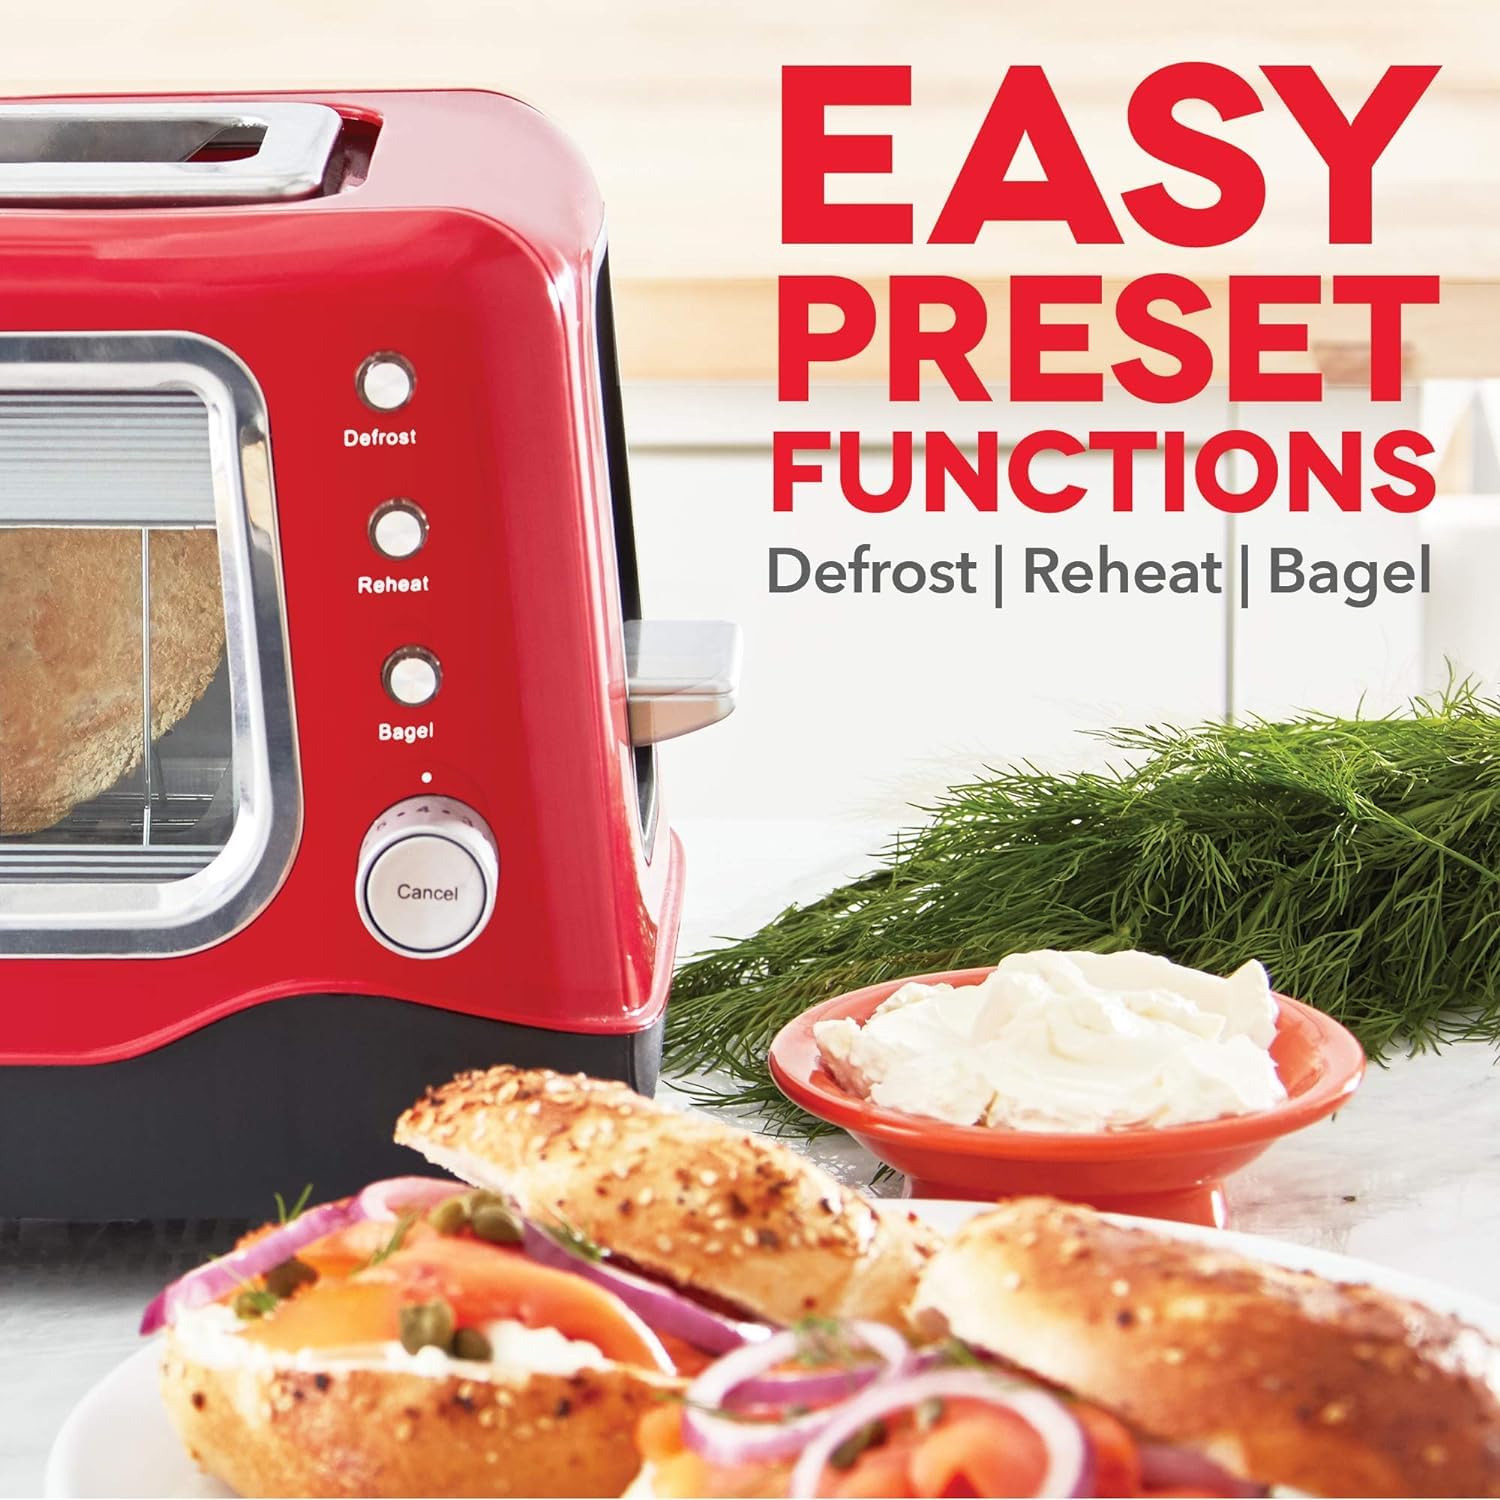 Cuisinart's Kitchen Appliances for Professional and Home Chefs